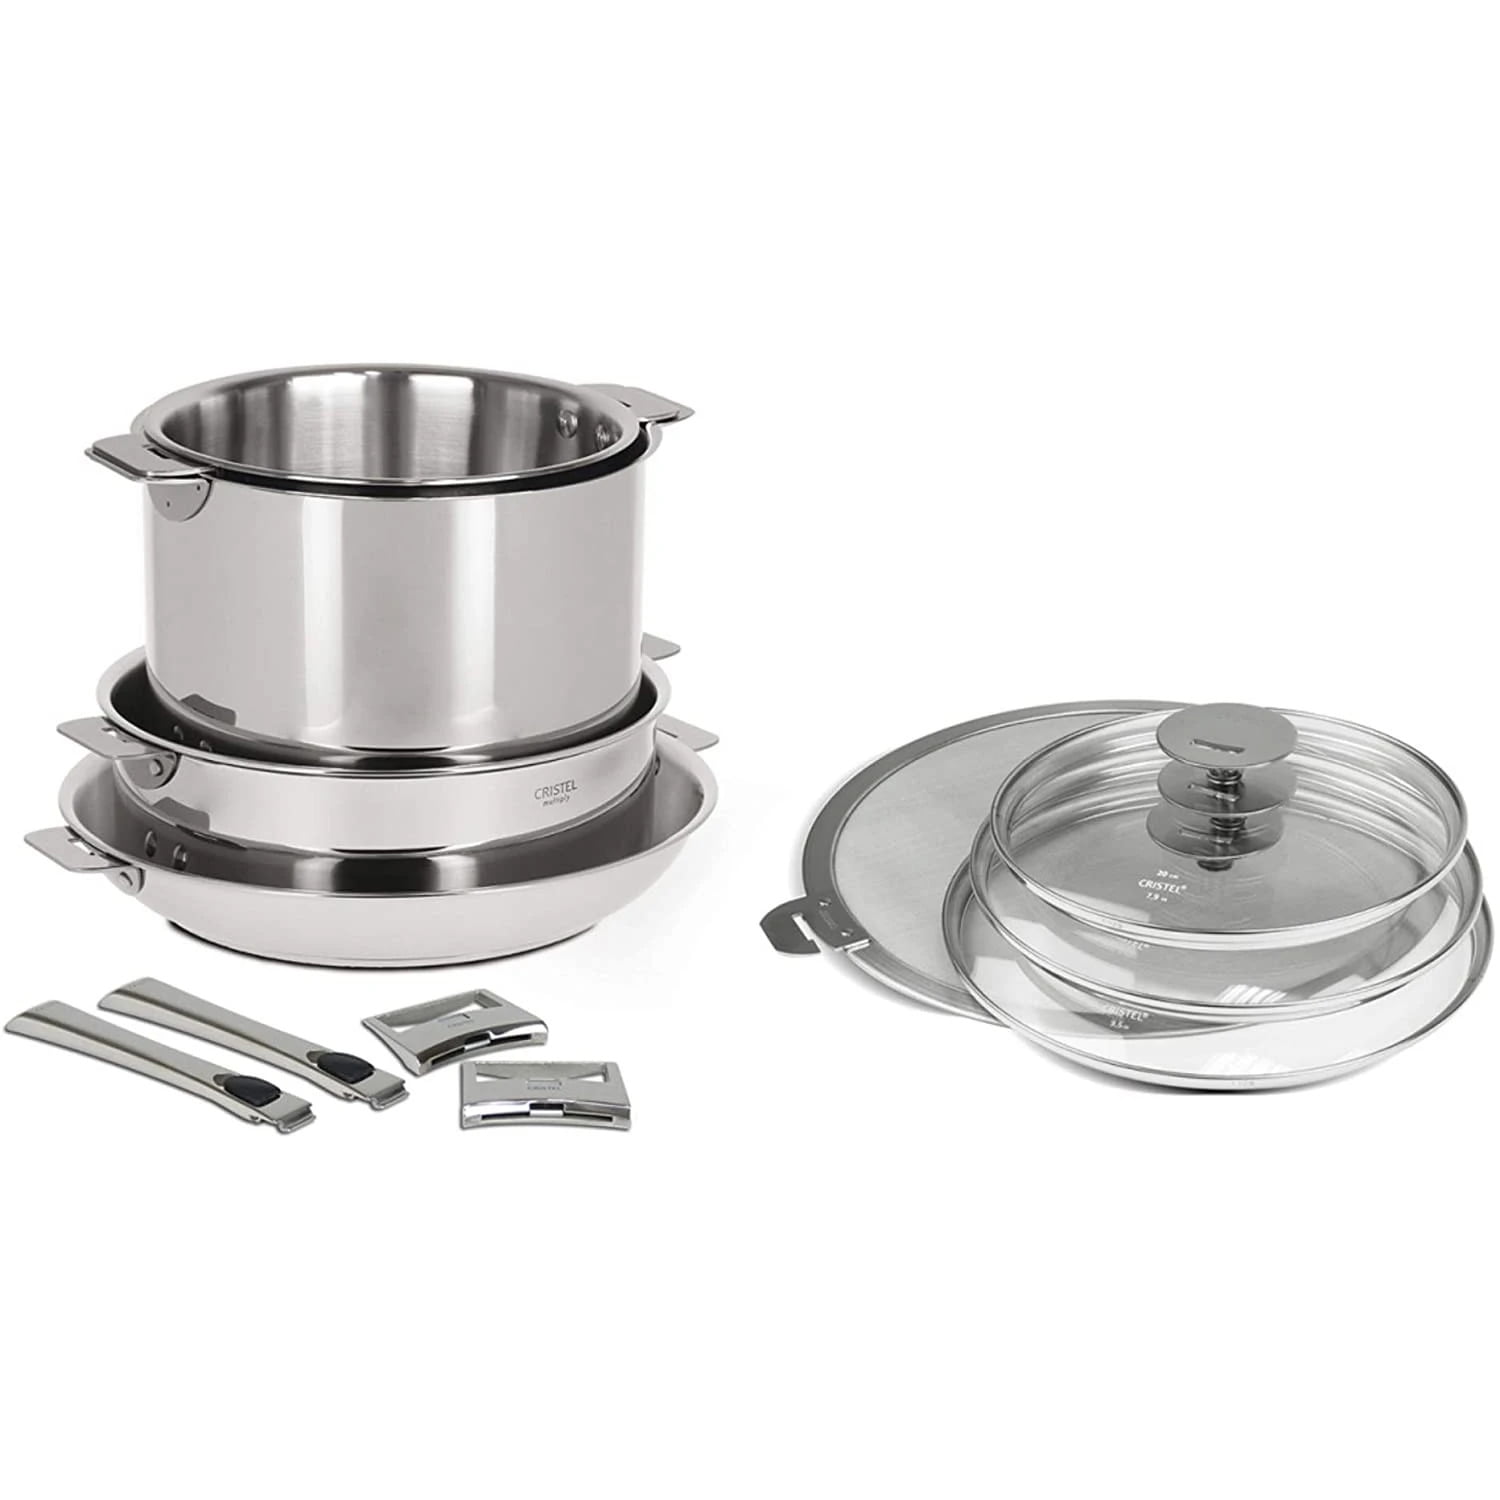 Cristel Casteline 18/10 Stainless Steel 13 Piece Cookware Set with Removable Handles Silver 